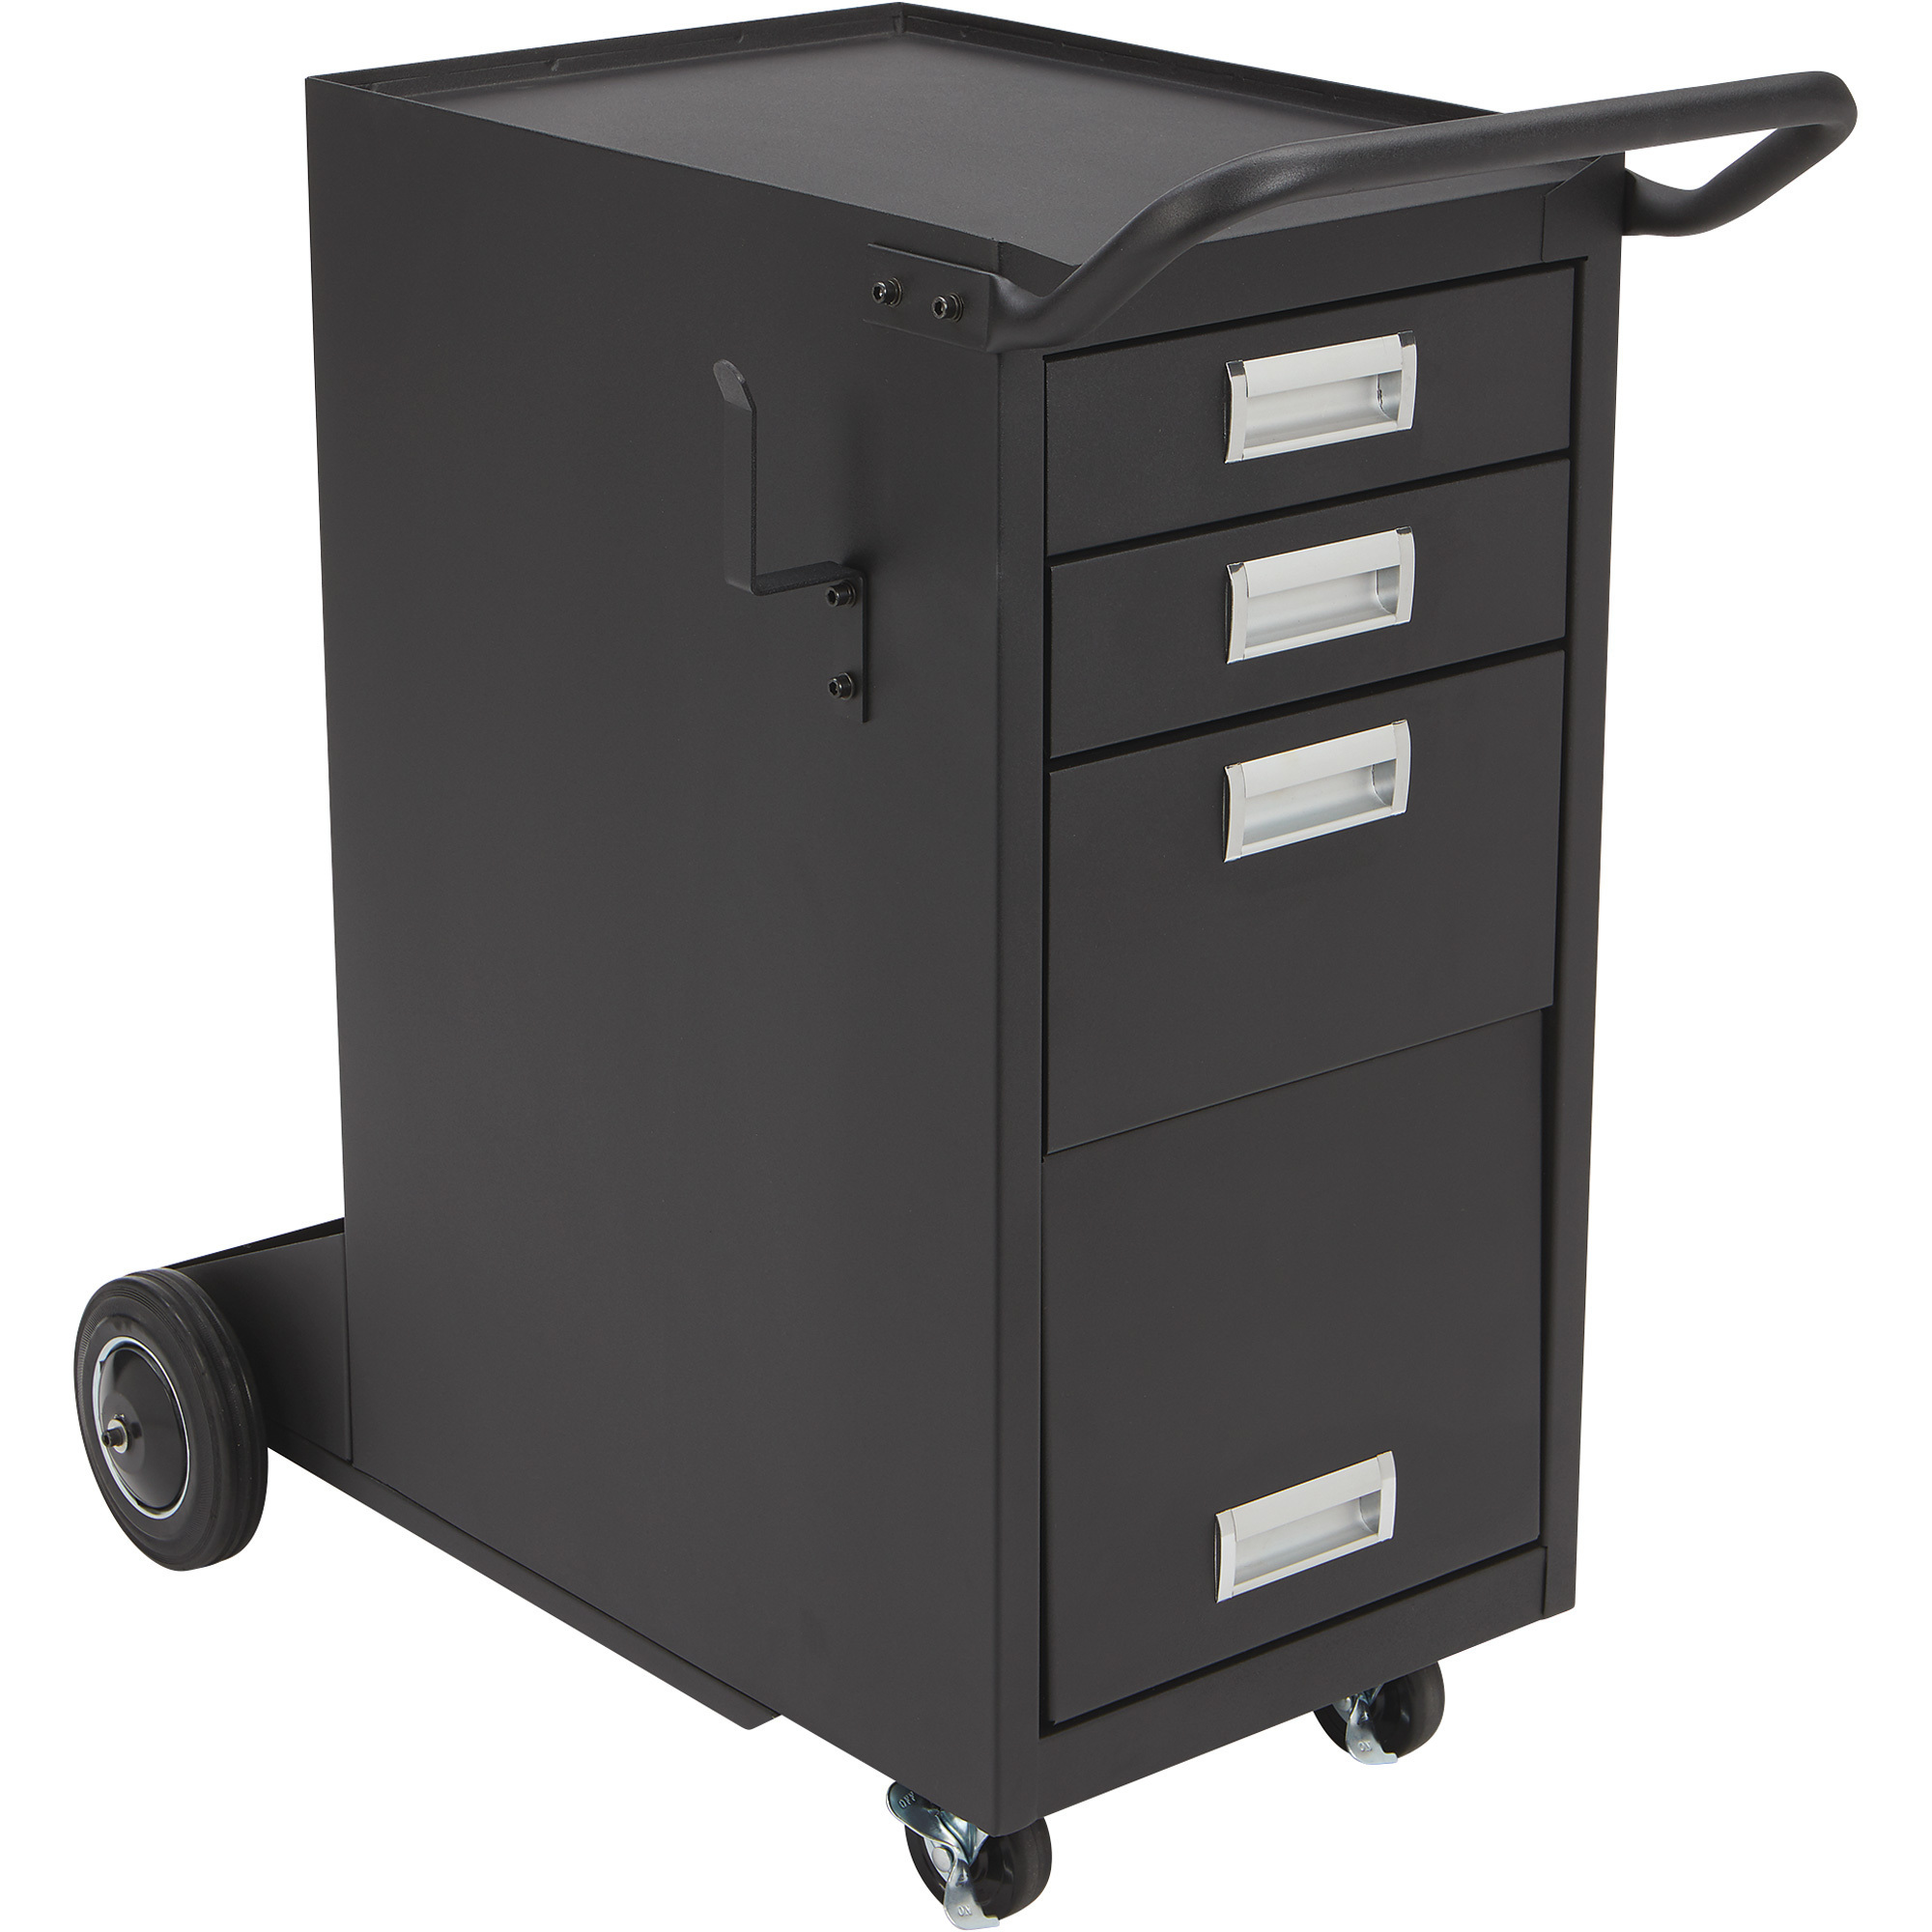 Klutch Deluxe 3-Drawer Welding Cabinet with Enclosed Storage, 35 3/4Inch L x 19 3/4Inch W x 33 3/4n.H